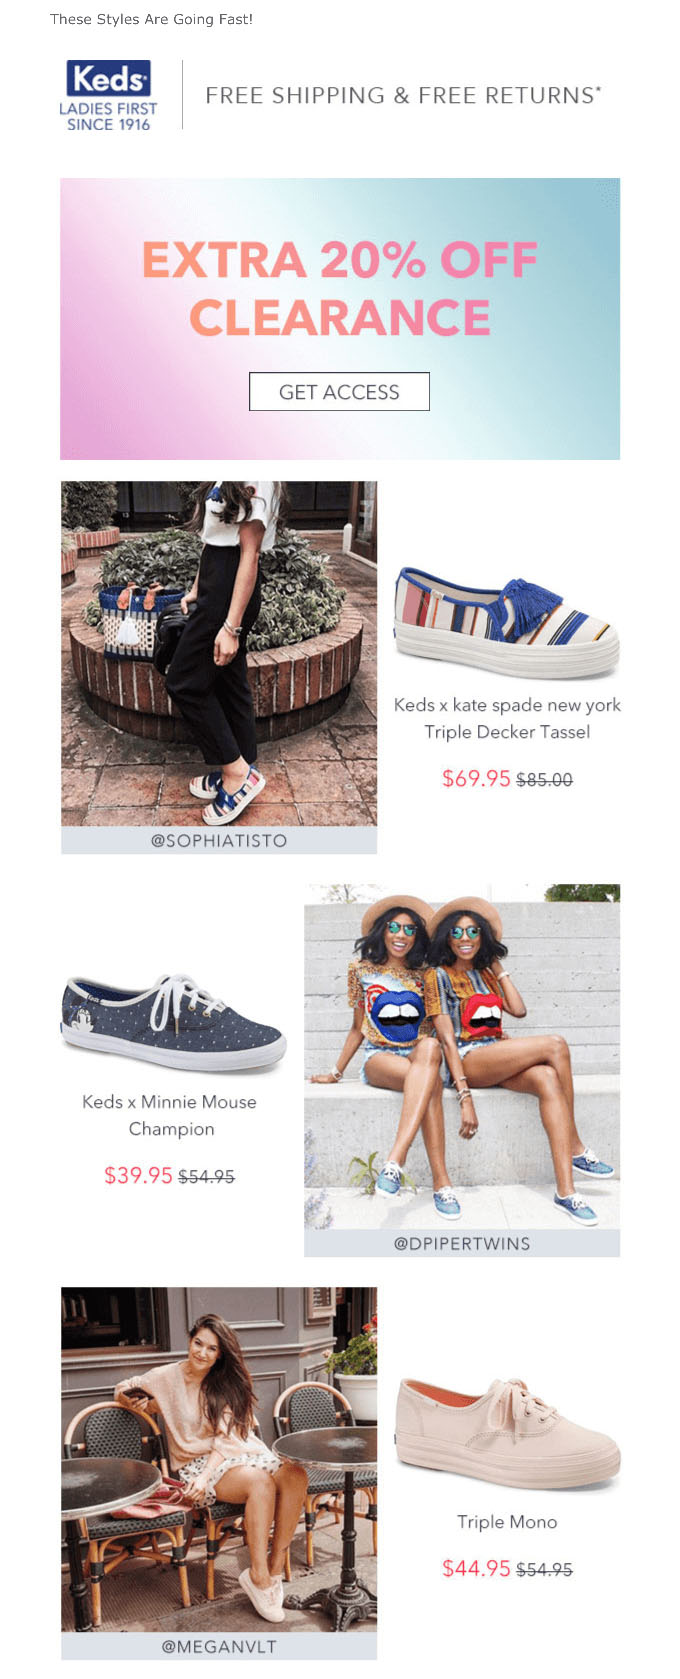 Behavioral Emails - Social Proof Email Example - Keds